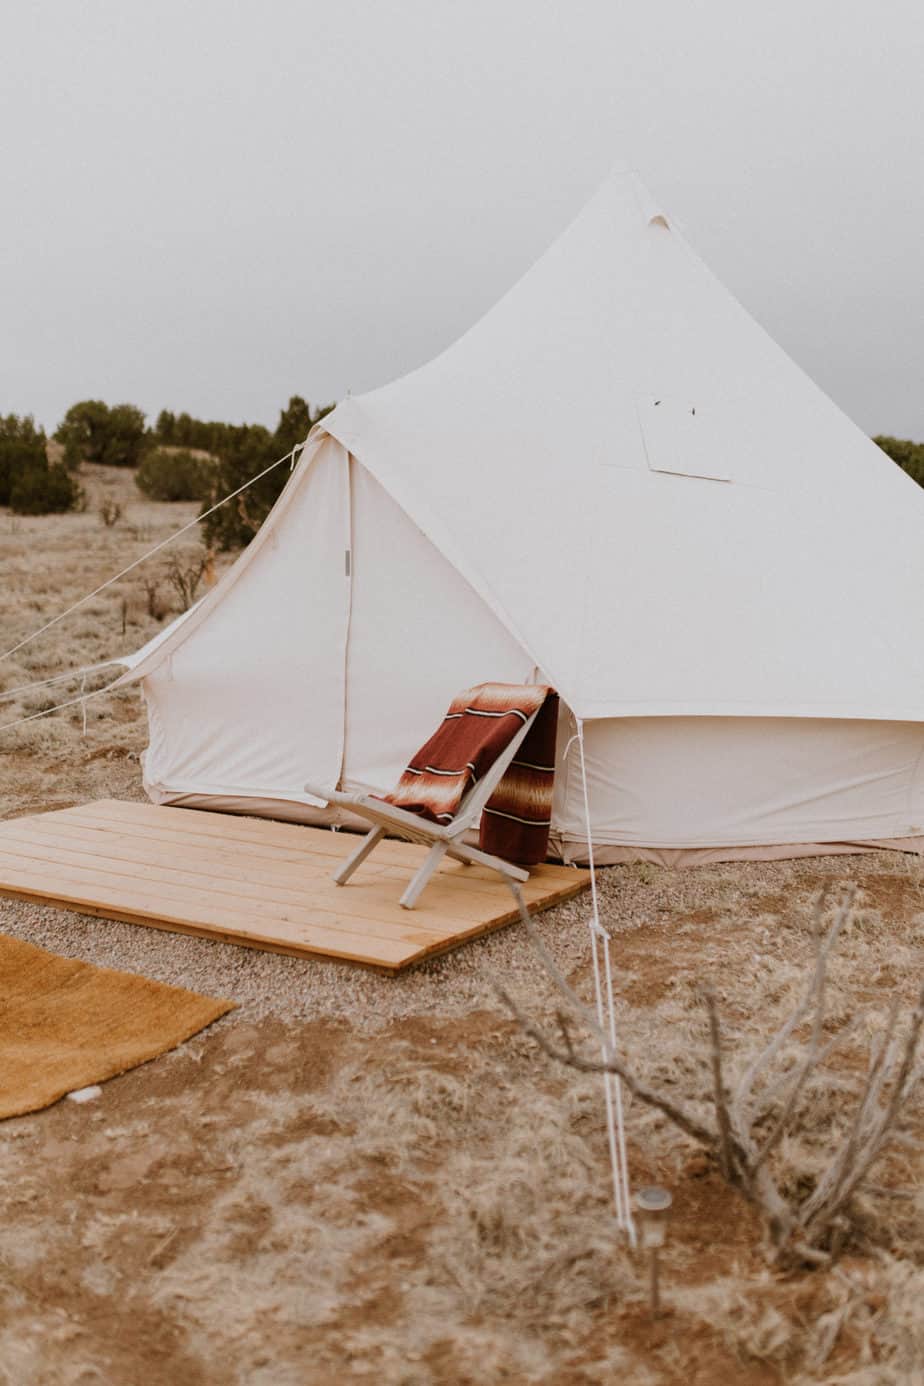 White Canvas Safari Style Tent with Pendleton Soutwest Style Blanket at Glamping Retreat in New Mexico